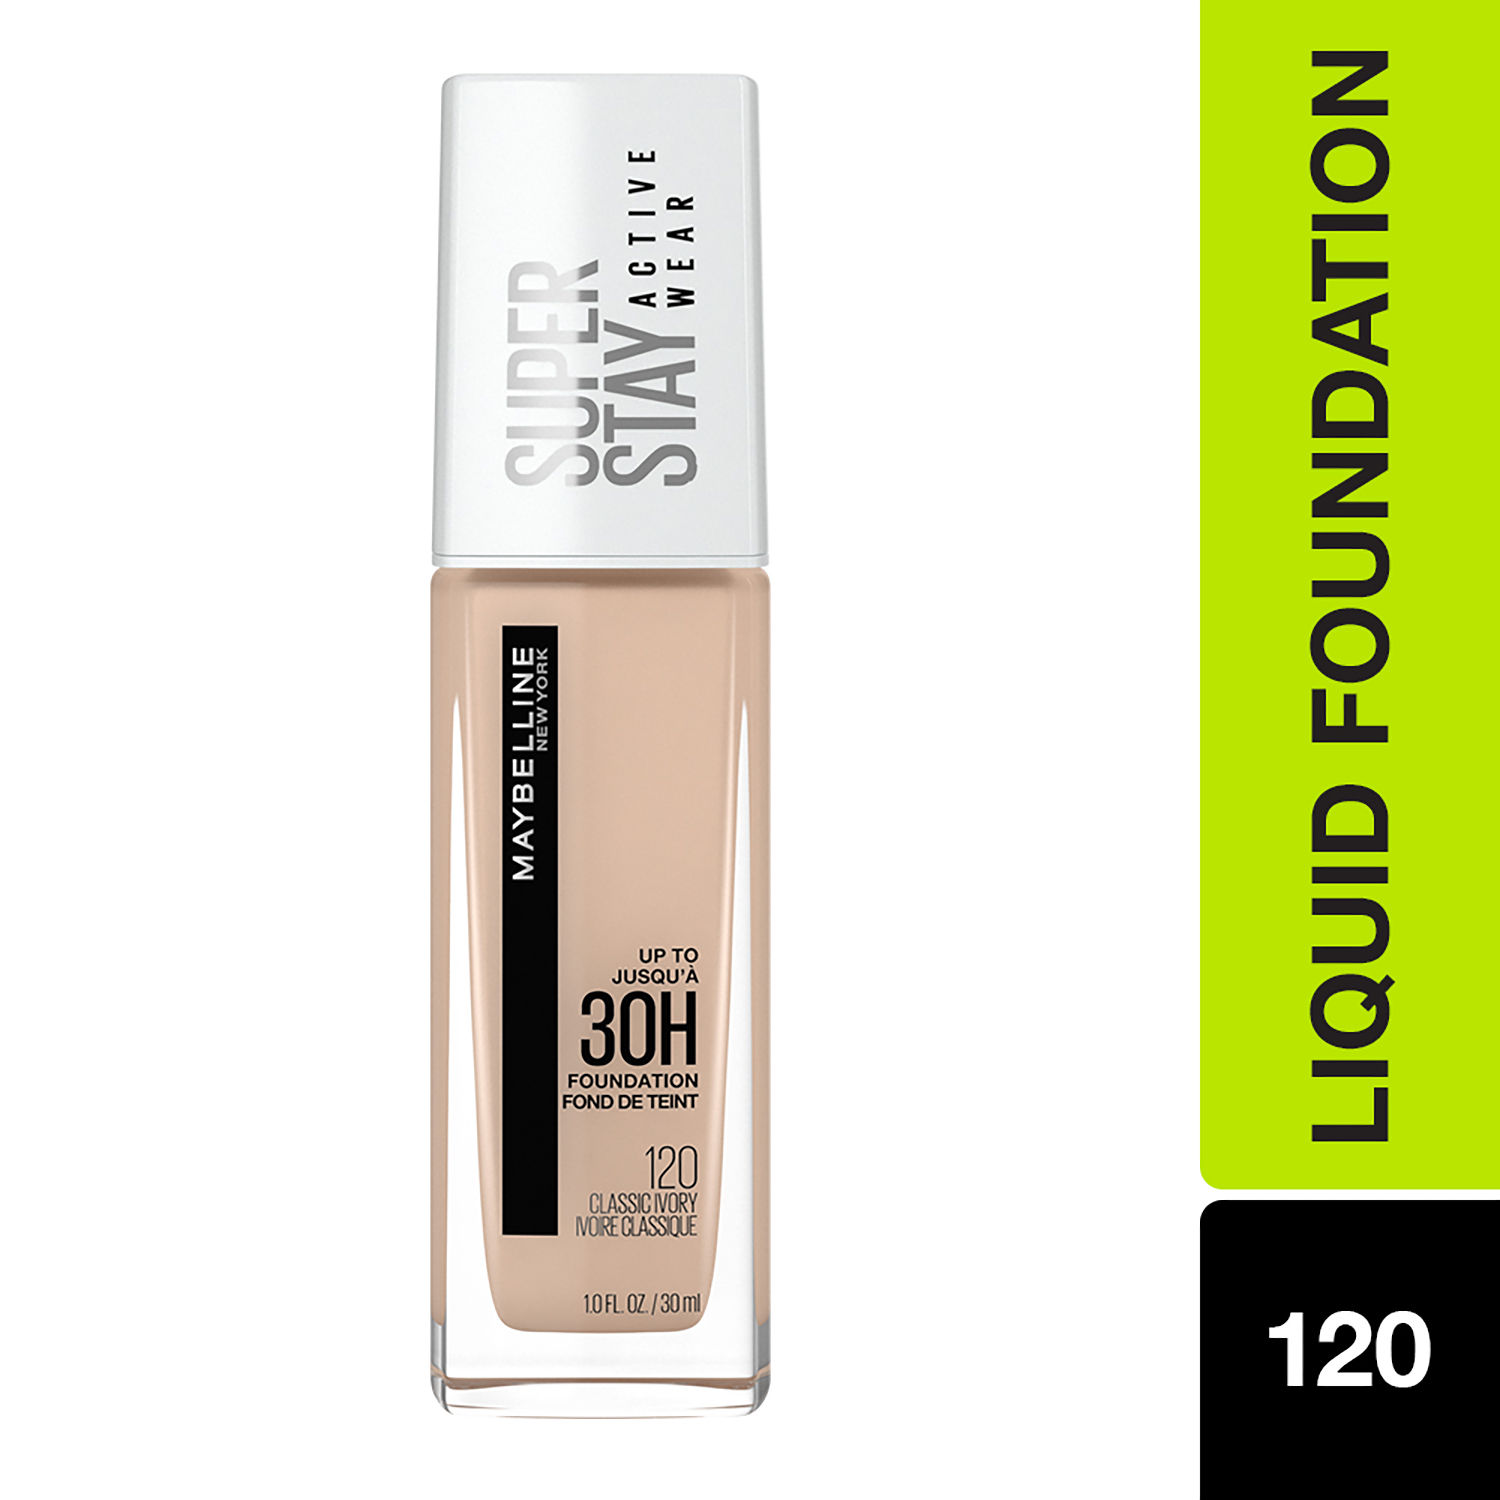 Maybelline New Super Classic Full Stay Wear Wear, York Coverage Liquid Ivory, 30ml Finish 30 120, Foundation, with Proof, Transfer Active Matte HR